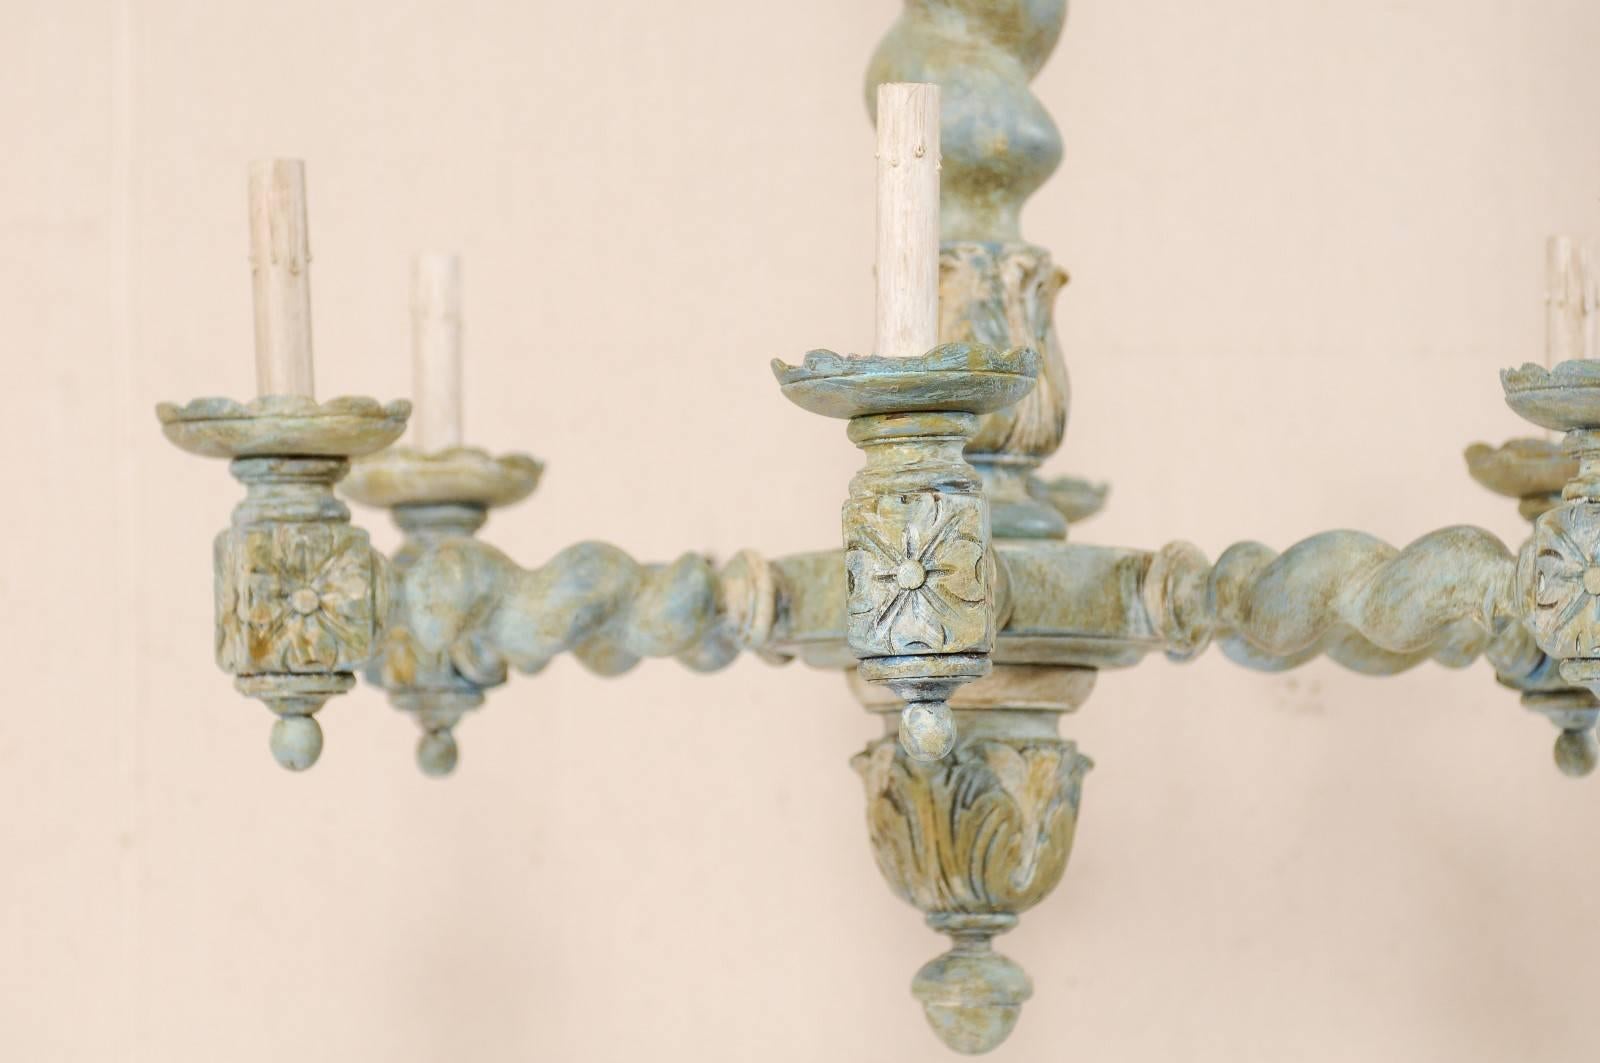 20th Century French Six-Light Barley Twist Wood Chandelier in Painted Tones of Blue and Cream